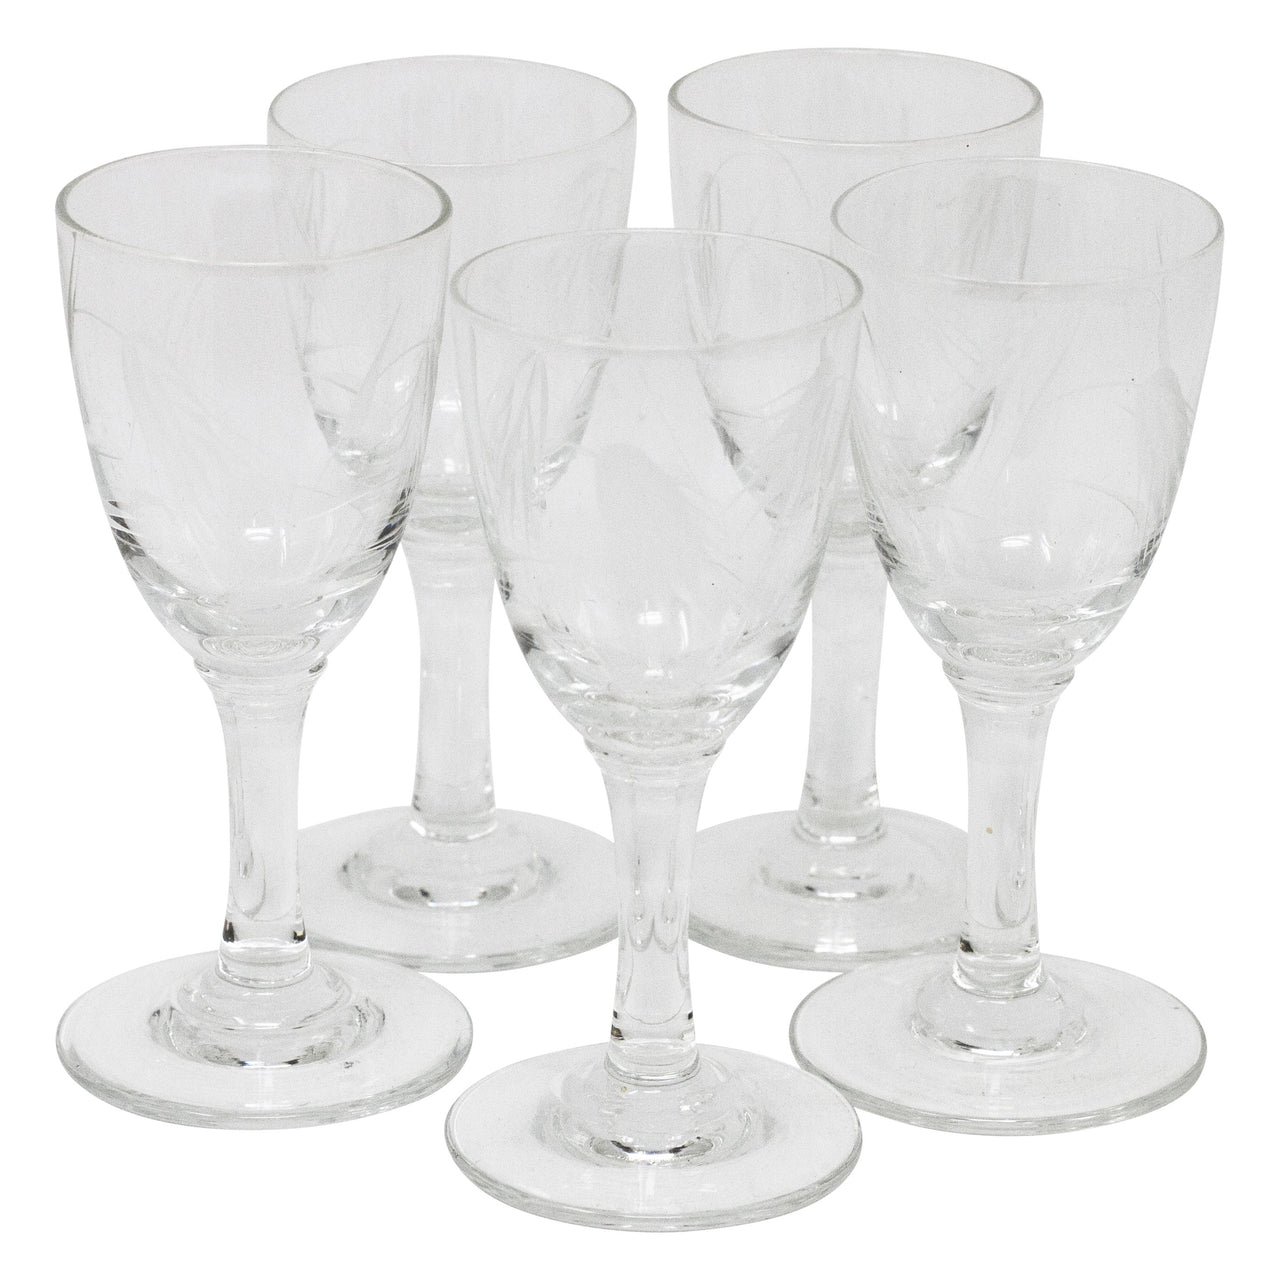 Vintage Sasaki Etched Wheat Cordial Glasses | The Hour Shop